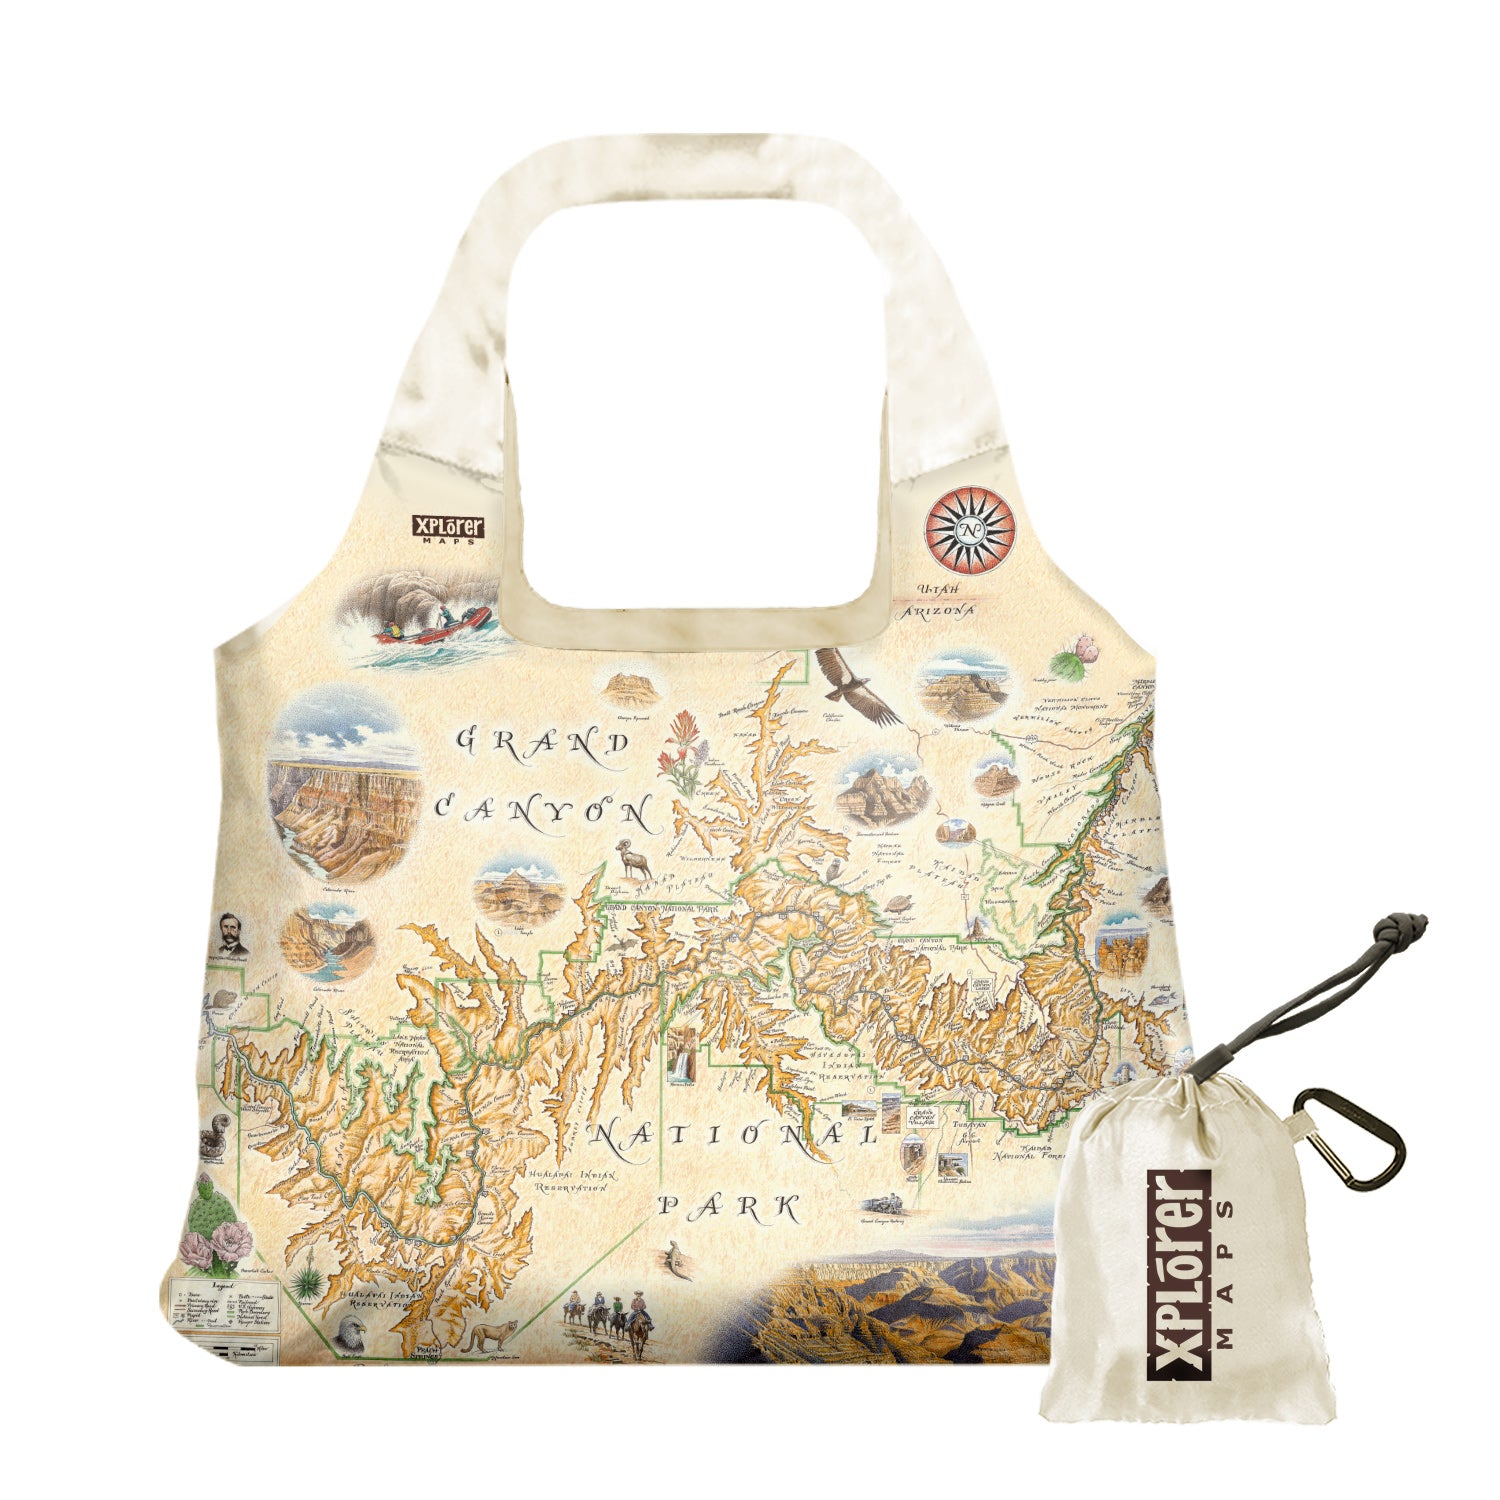 Arizona's Grand Canyon National Park Pouch Tote Bags by Xplorer Maps. Features illustrations of activities like whitewater rafting and mule riding, along tortoise, California Condor, and Beavertail Cactus.